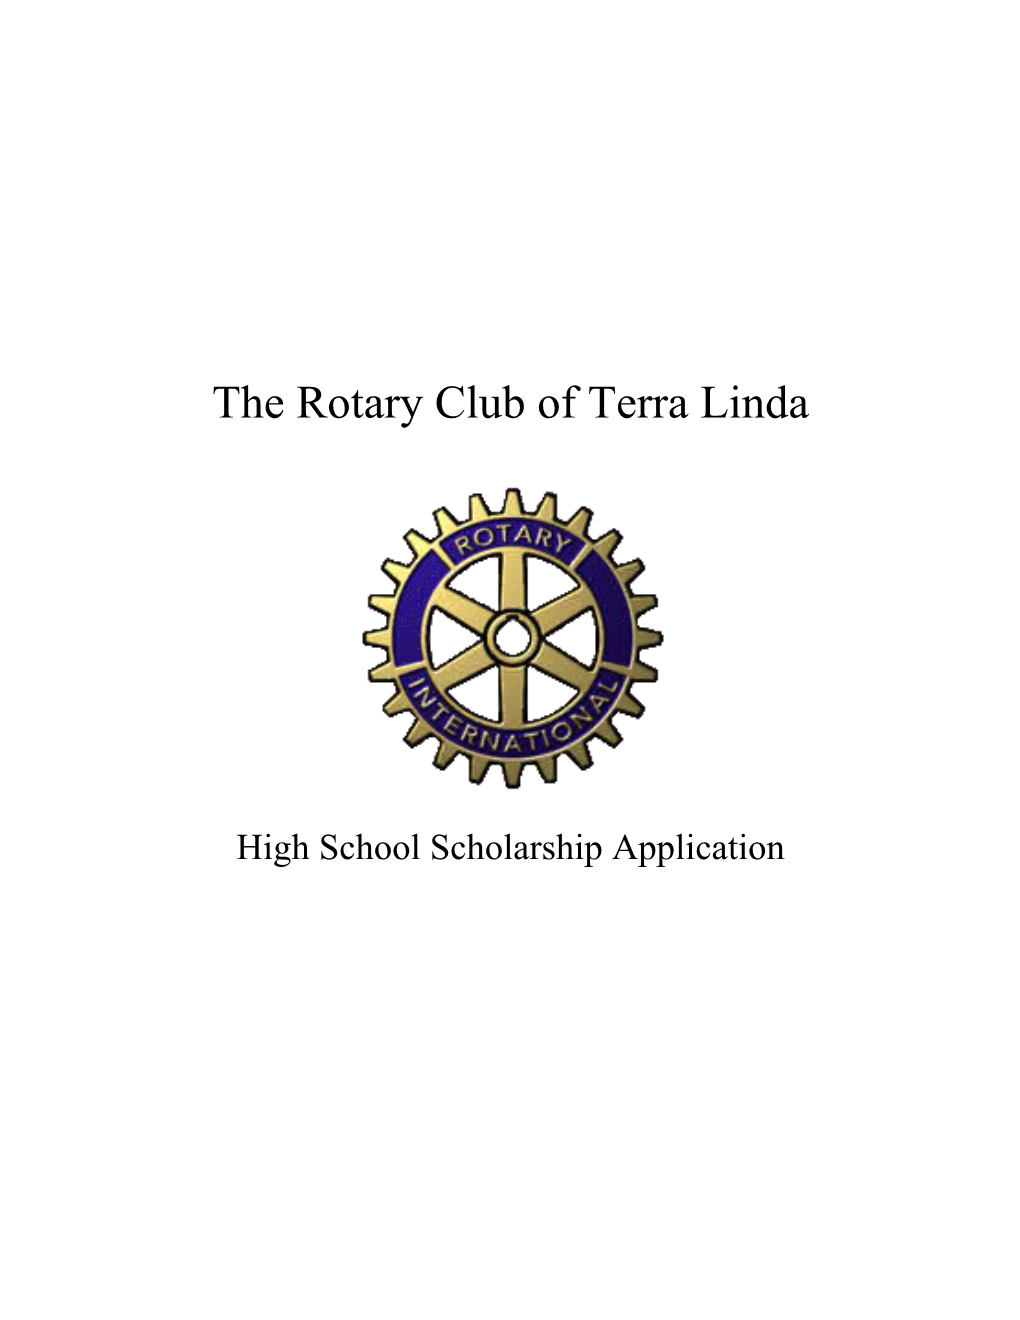 The Rotary Club of Terra Linda Offers Academic Scholarships to Graduating Seniors From